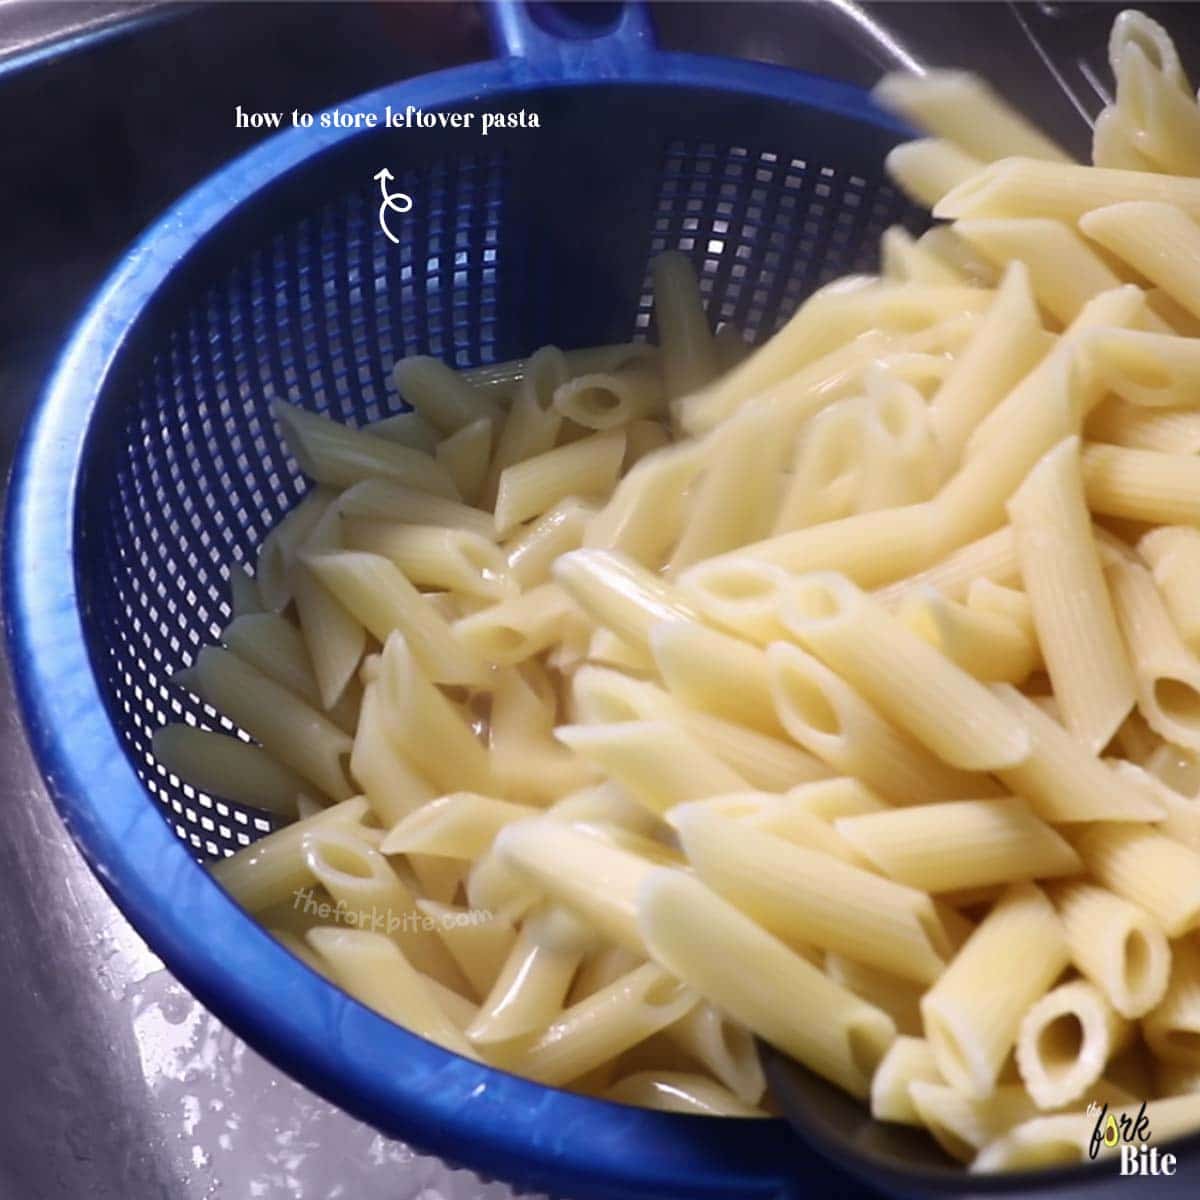 These ideas work regardless of the type of pasta. It can be the large shell type, lasagne noodles, penne, or spaghetti. The bigger the pasta, the better these methods I am about to pass on to you will work.